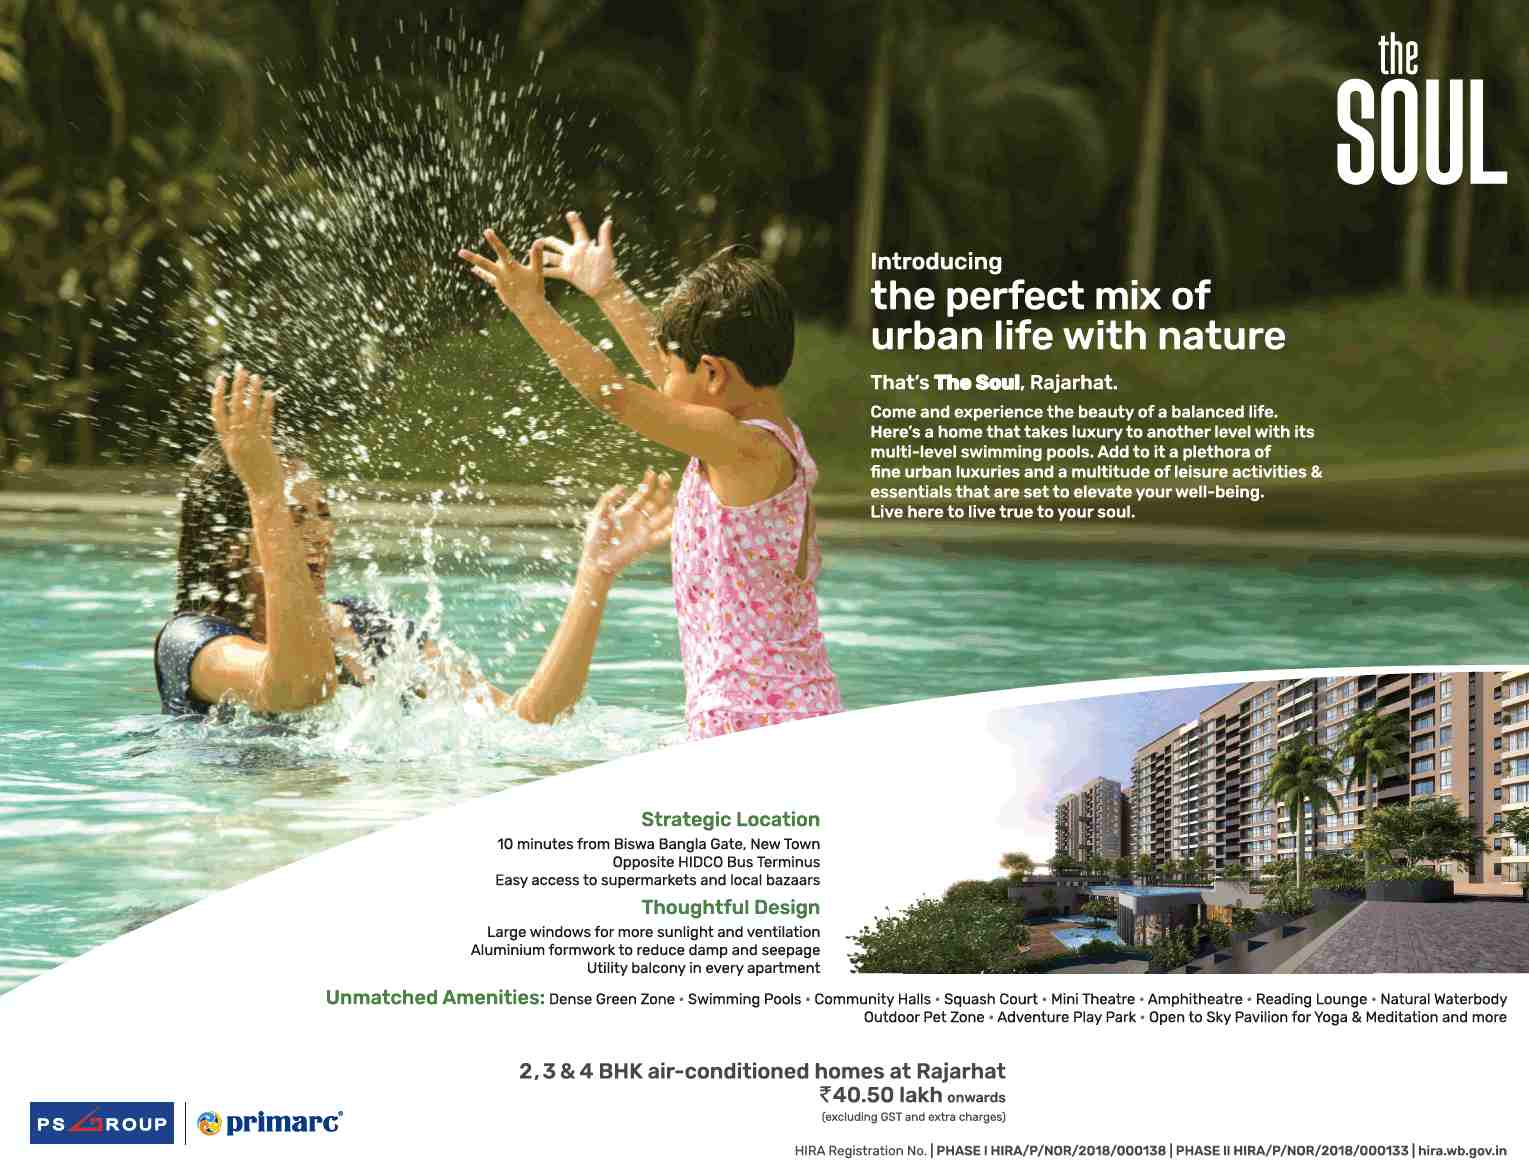 Introducing the perfect mix of urban life with nature at PS Primarc The Soul in Kolkata